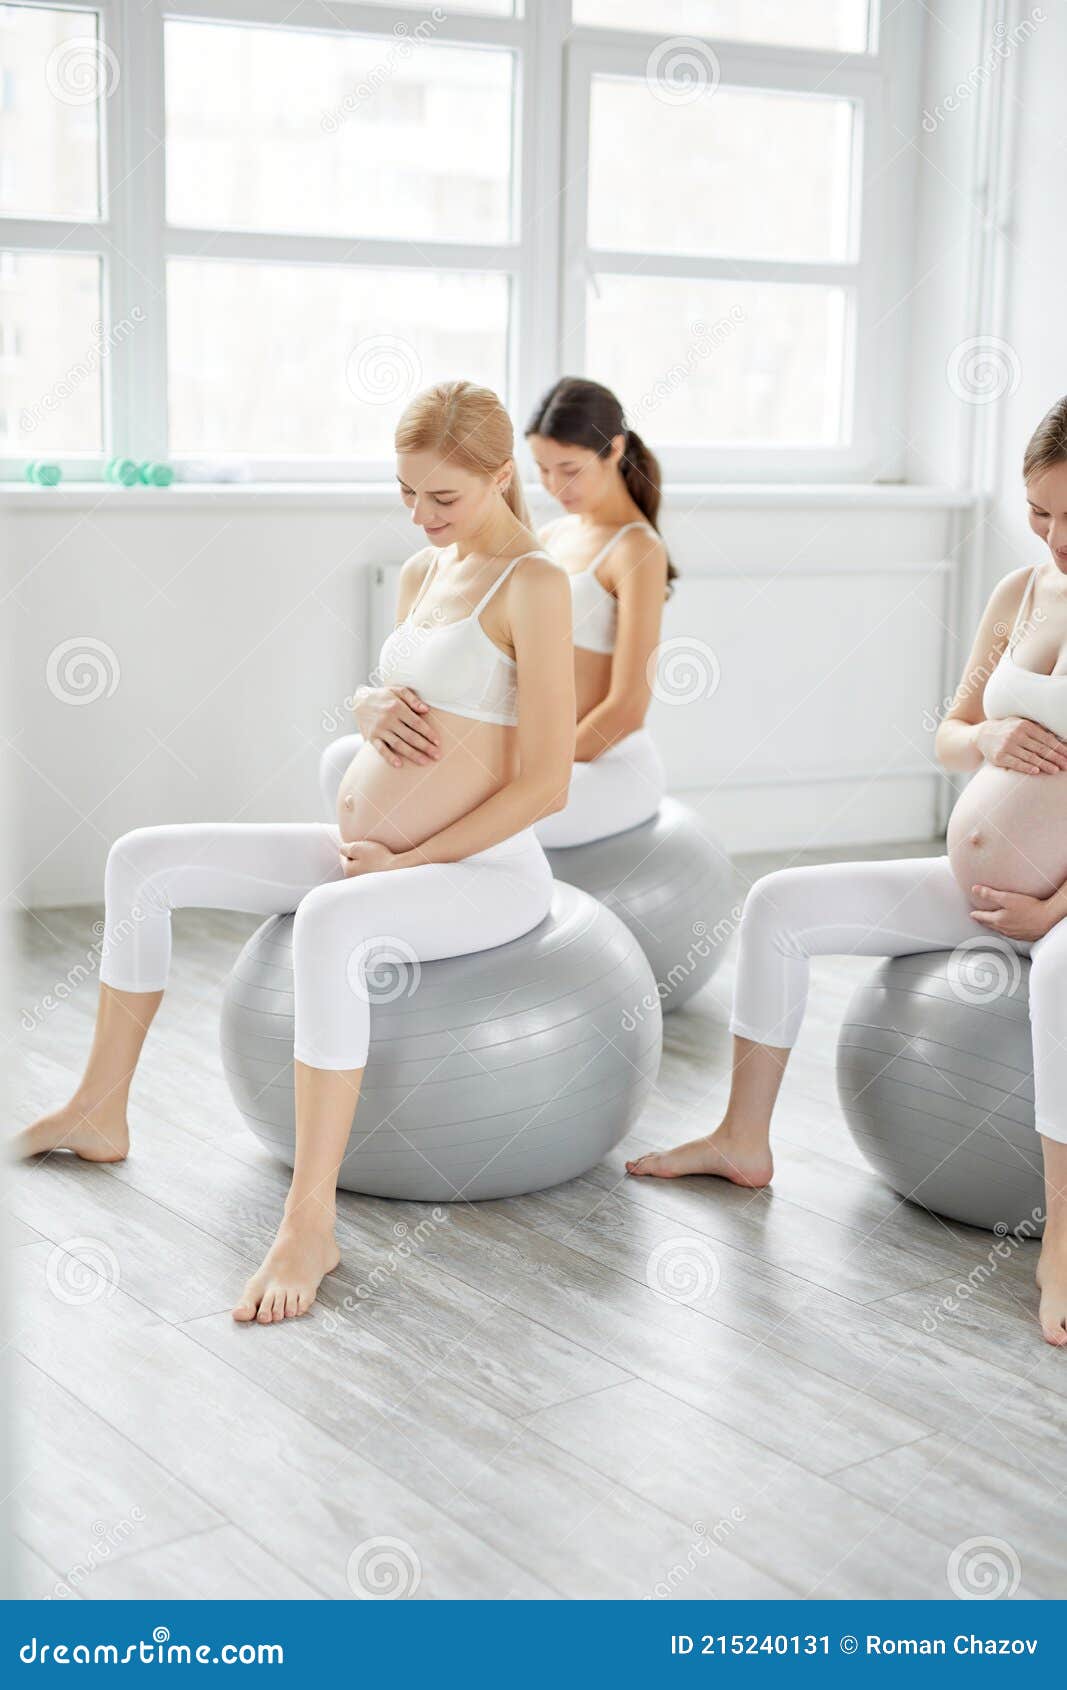 Pregnant Group Nude Girls - Relaxed Pregnant Women Lead Active Healthy Lifestyle, Going for Yoga  Fitness Sport Stock Image - Image of closeup, hand: 215240131